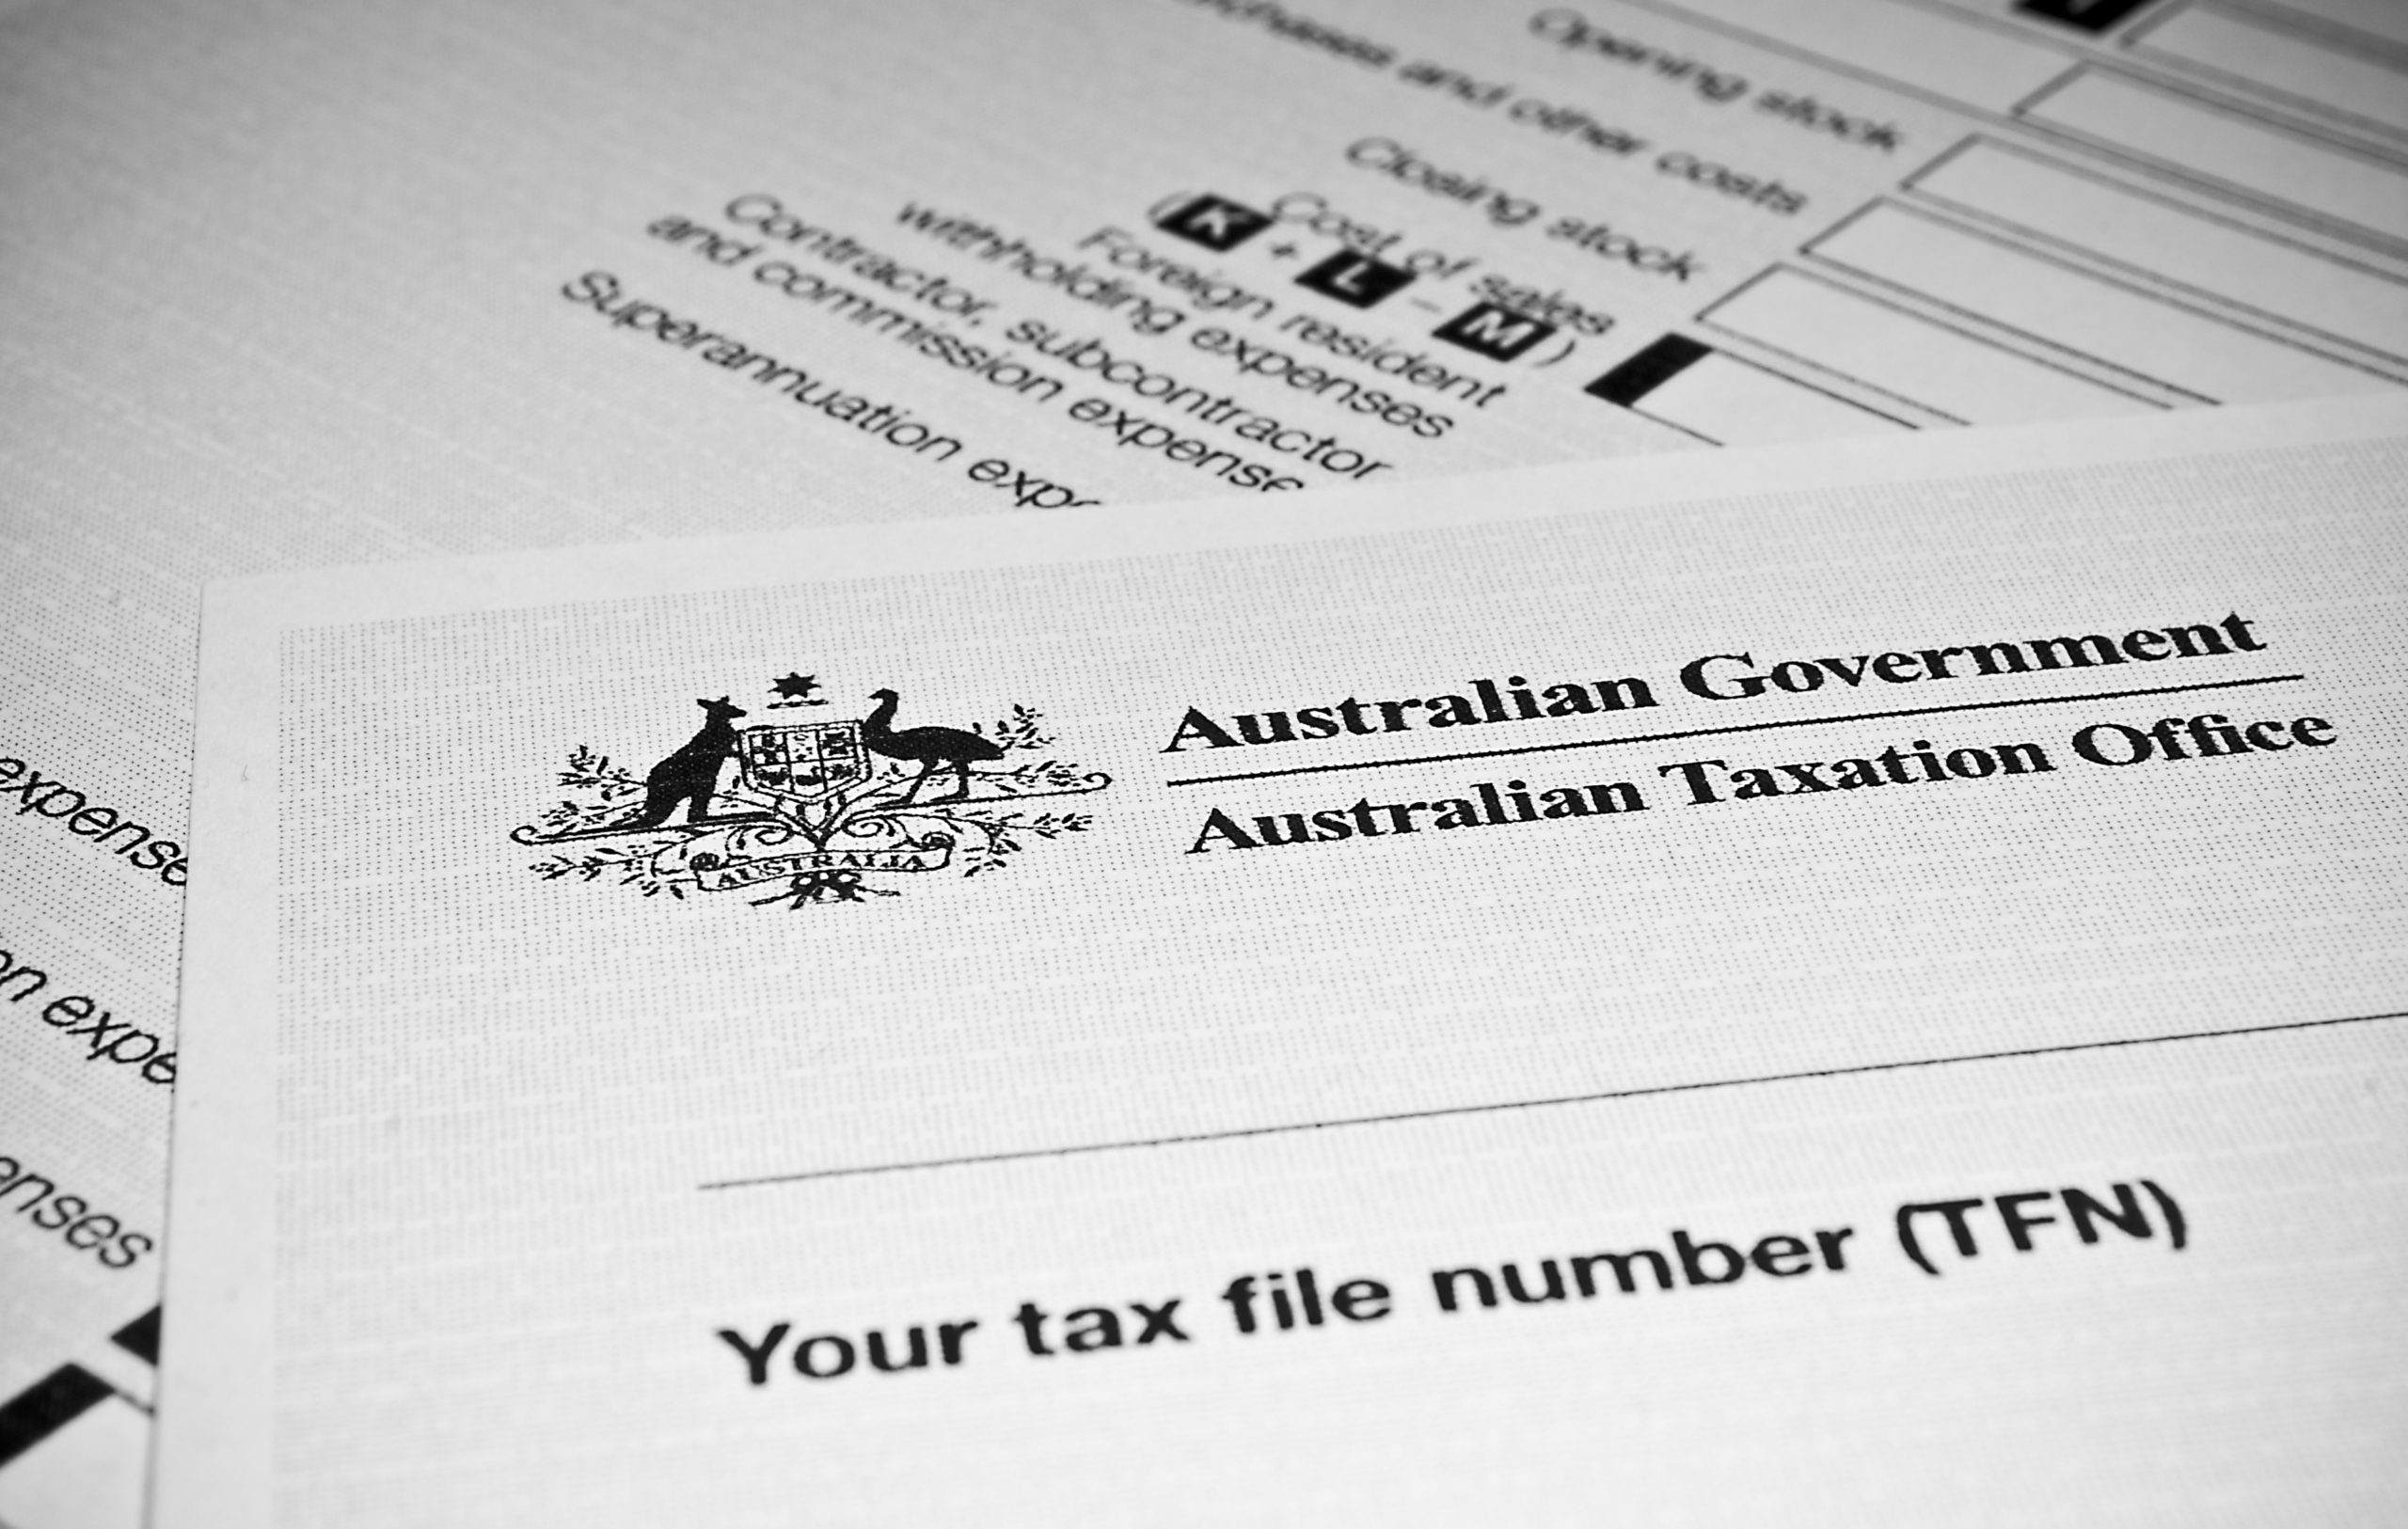 Paperwork from the Australian Taxation Office